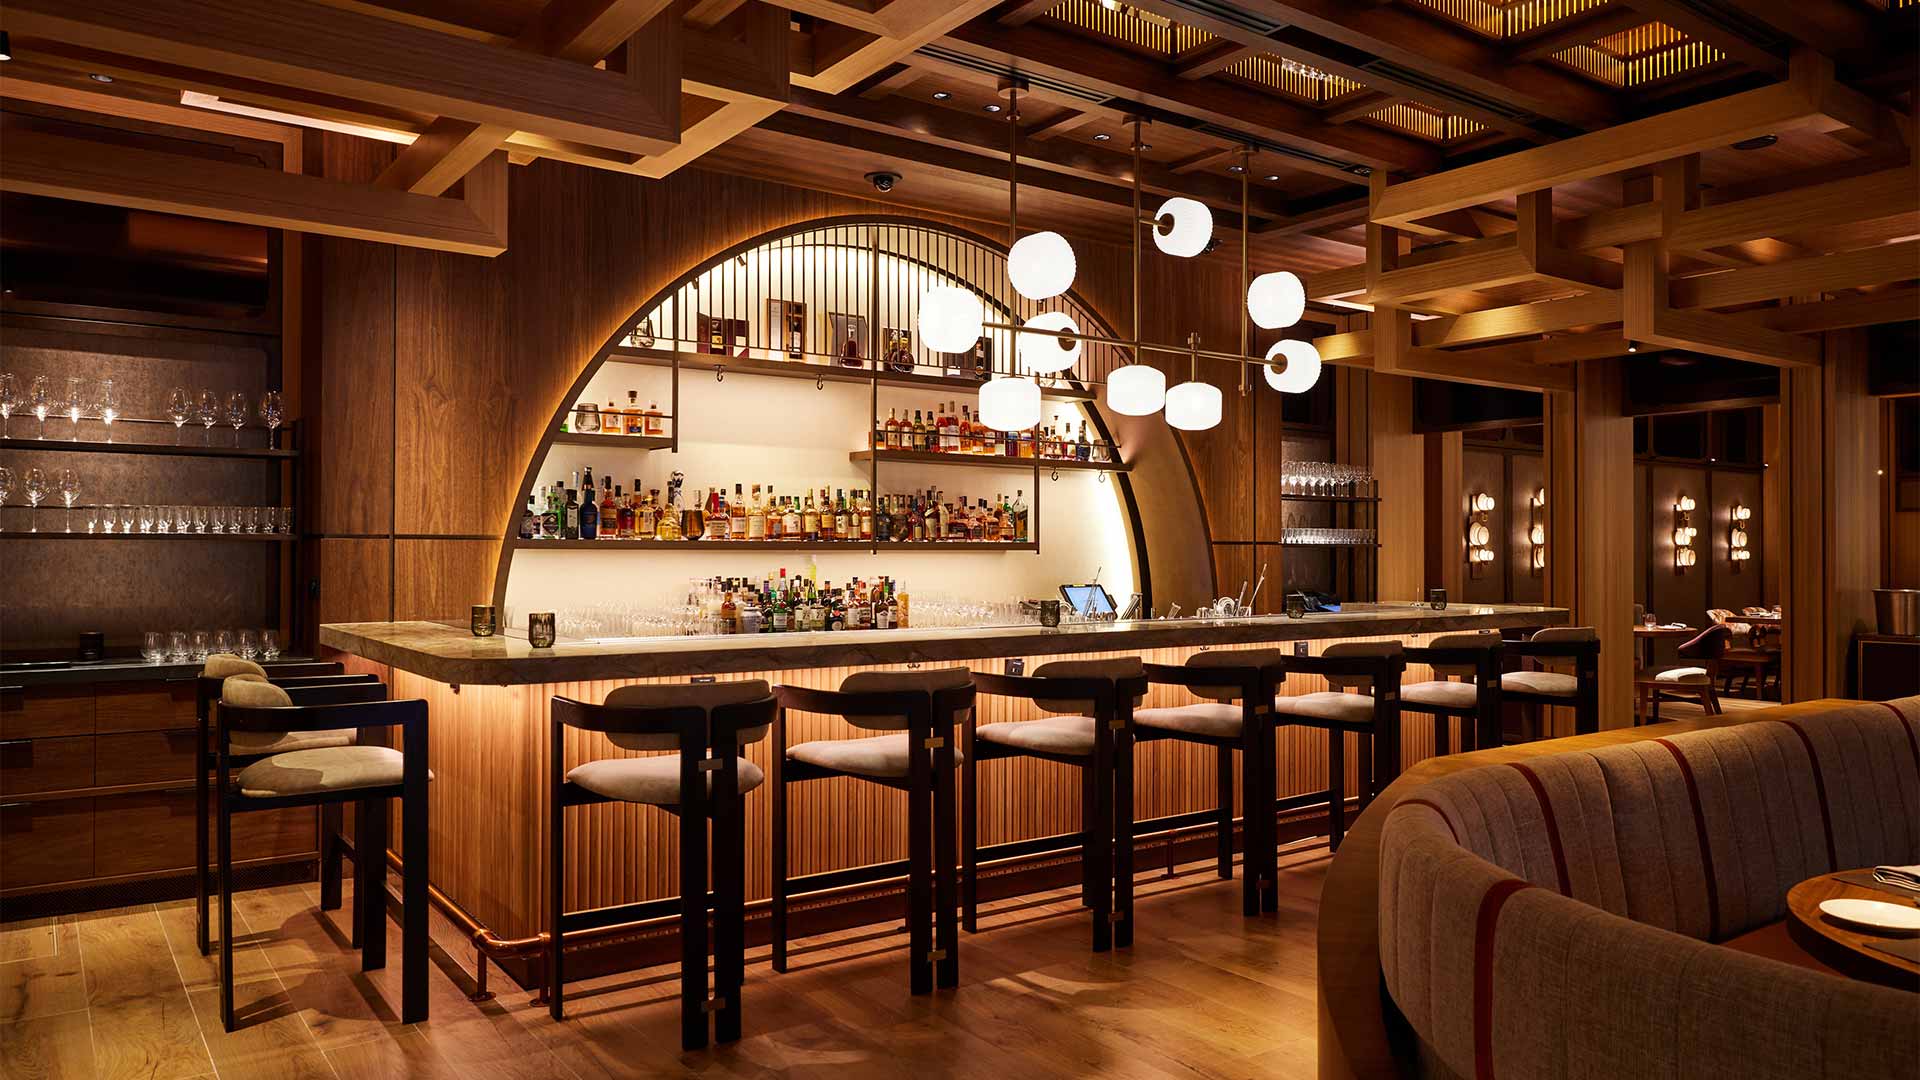 Bar area of Wakuda Singapore, a restaurant and bar in Singapore to hold private events and meetings